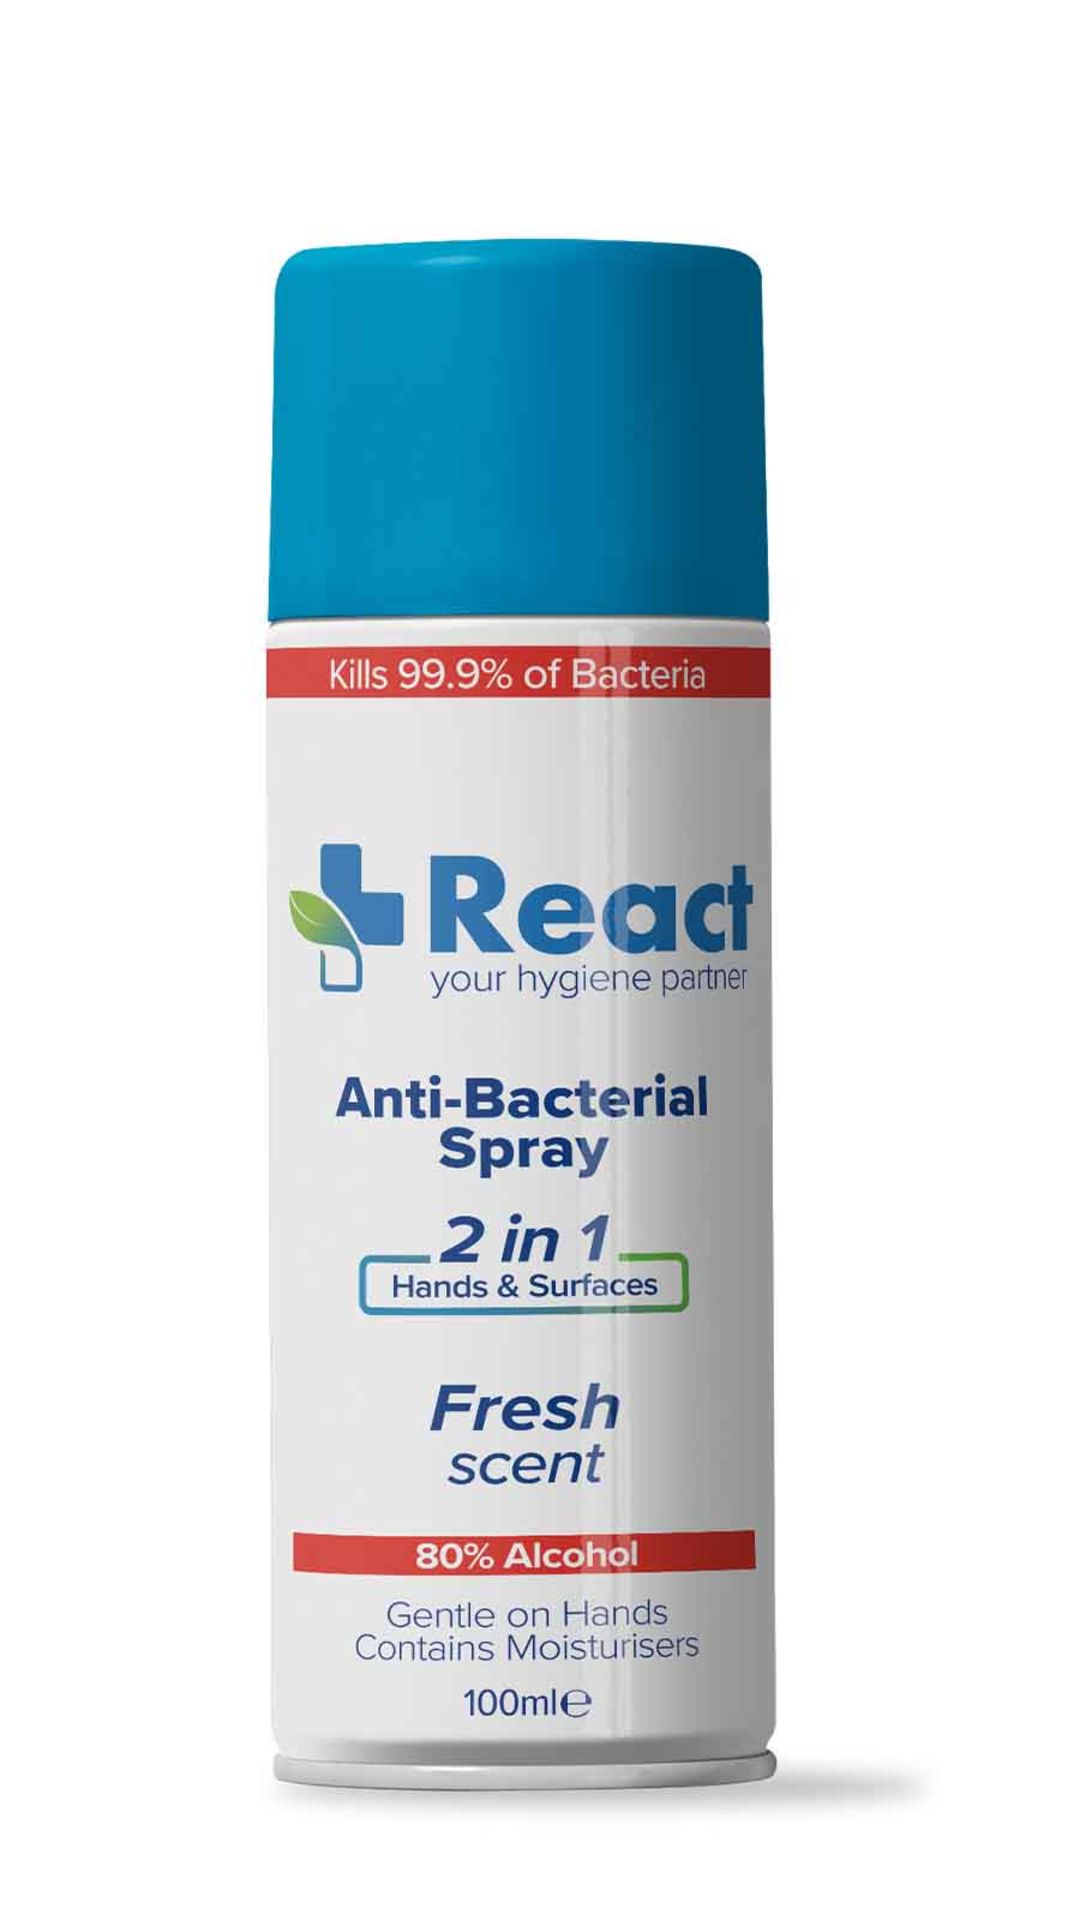 Pallet To Contain 4,800 X React Antibacterial Spray 100ml. RRP £3.59 each, giving this lot a total